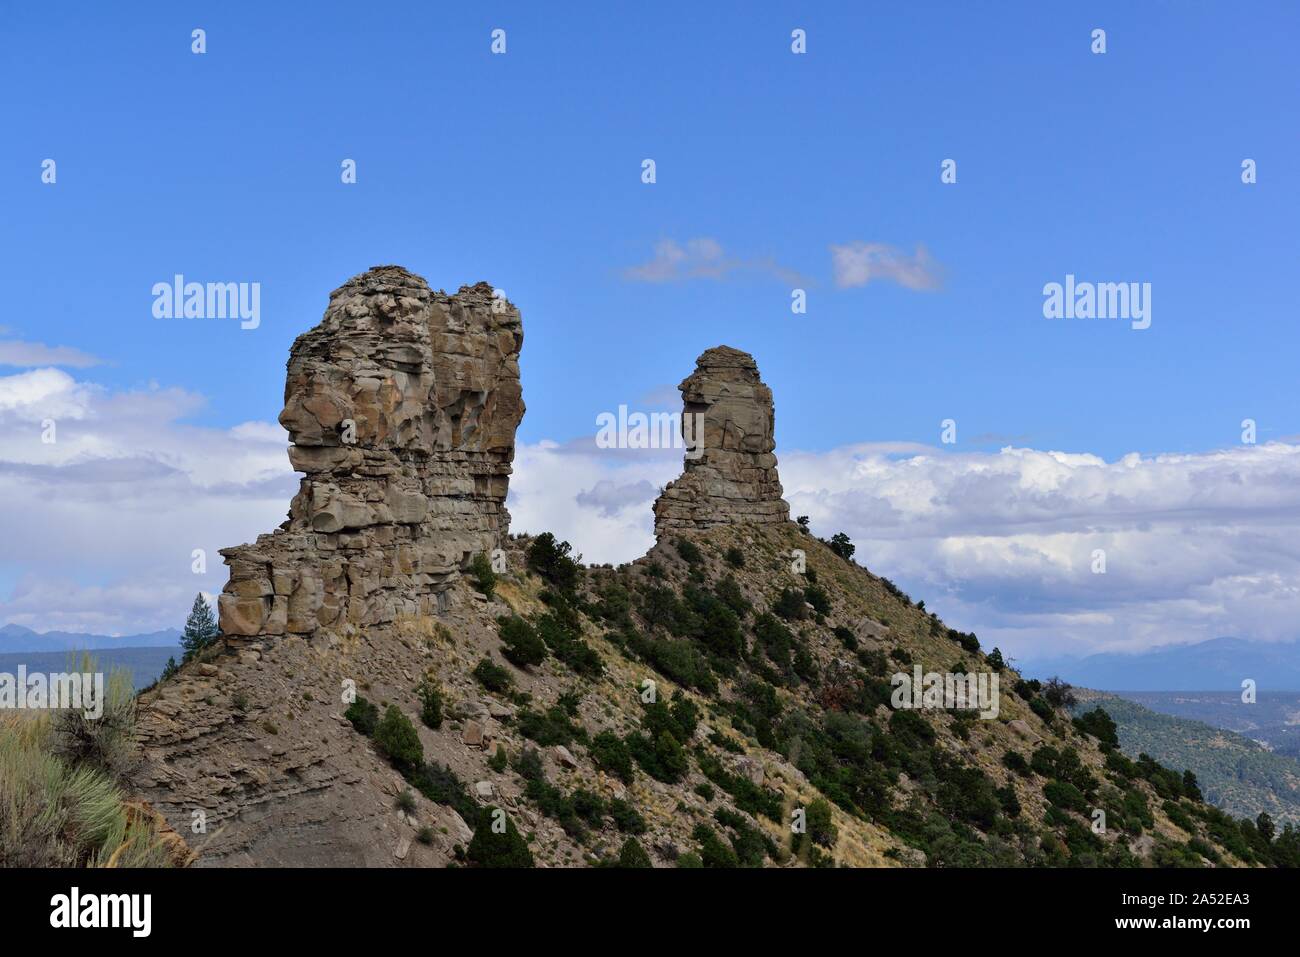 Chimney Rock and Companion Rock, Chimney Rock National Monument, CO 190911 61305 Stock Photo